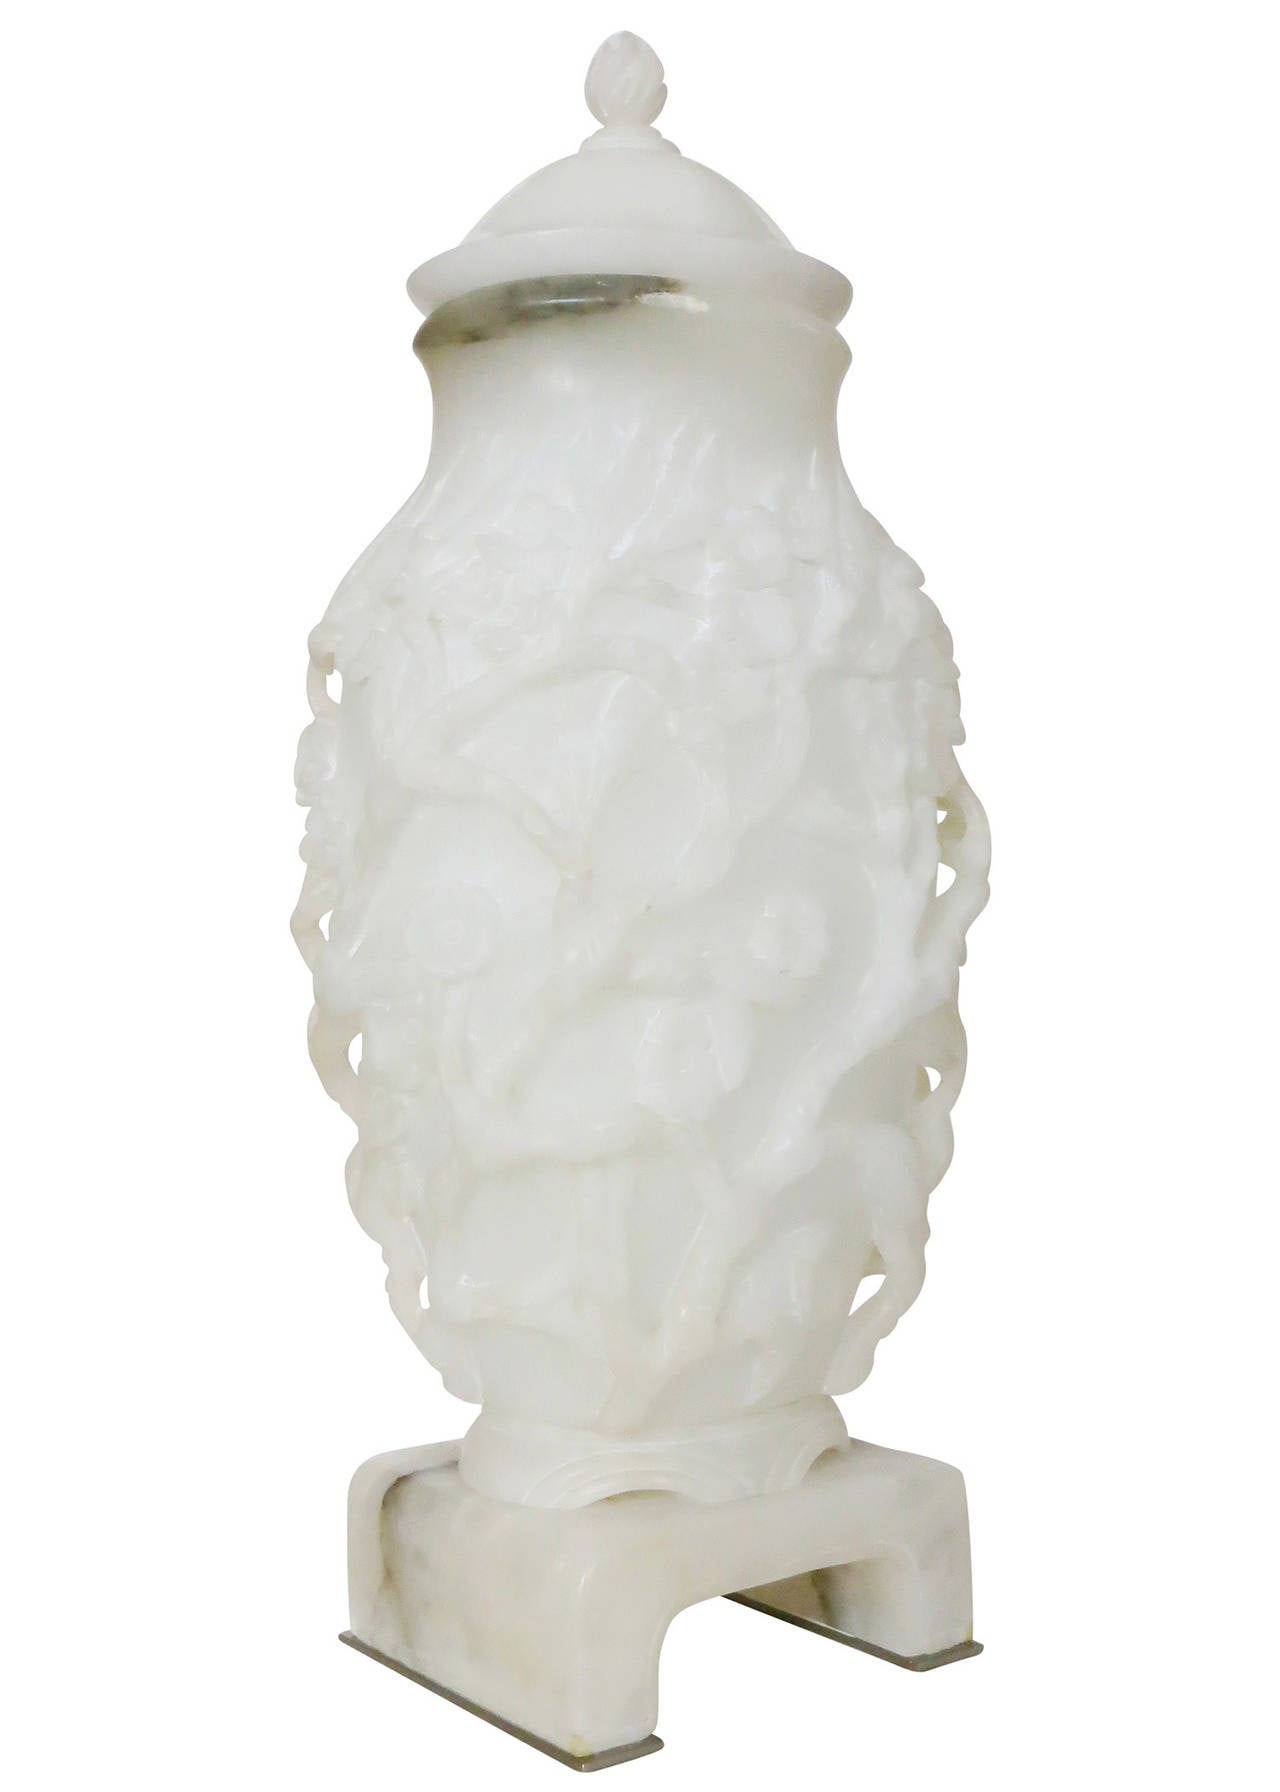 This classic Asian Urn lamp by Marbro a California company known for engaging European craftsmen to realize their designs.

This piece is handcrafted white alabaster with the classic cherry blossom motif. It rests on brushed nickel feet and is lit